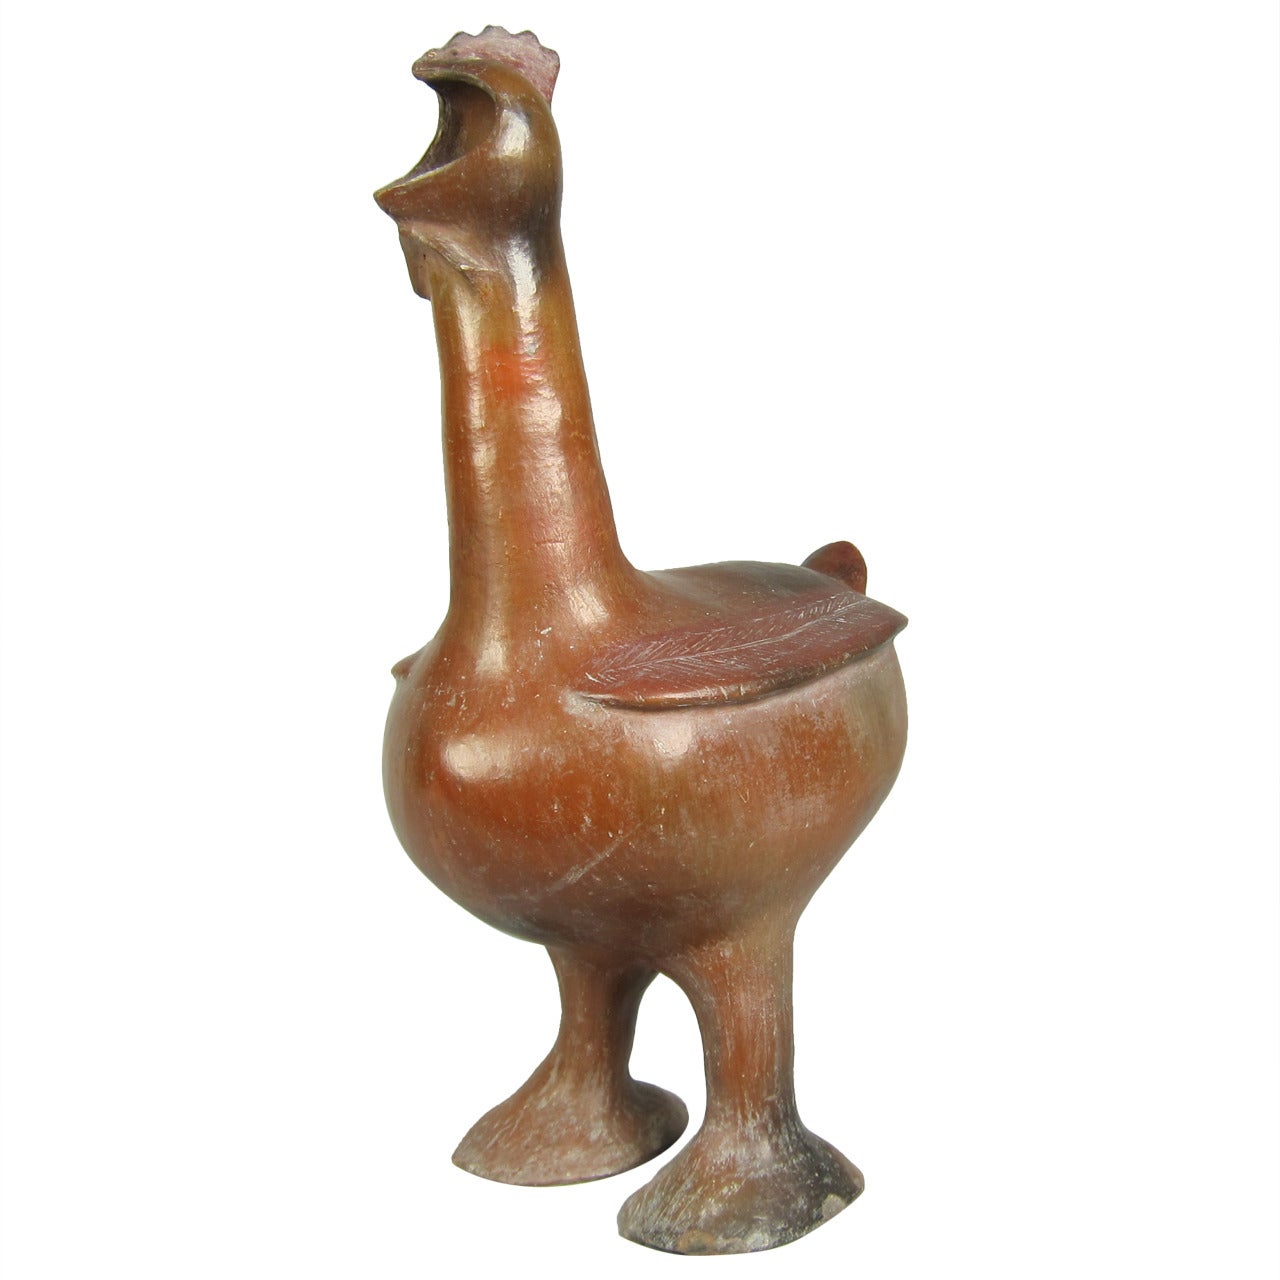 19th Century Sotho Vessel, South Africa